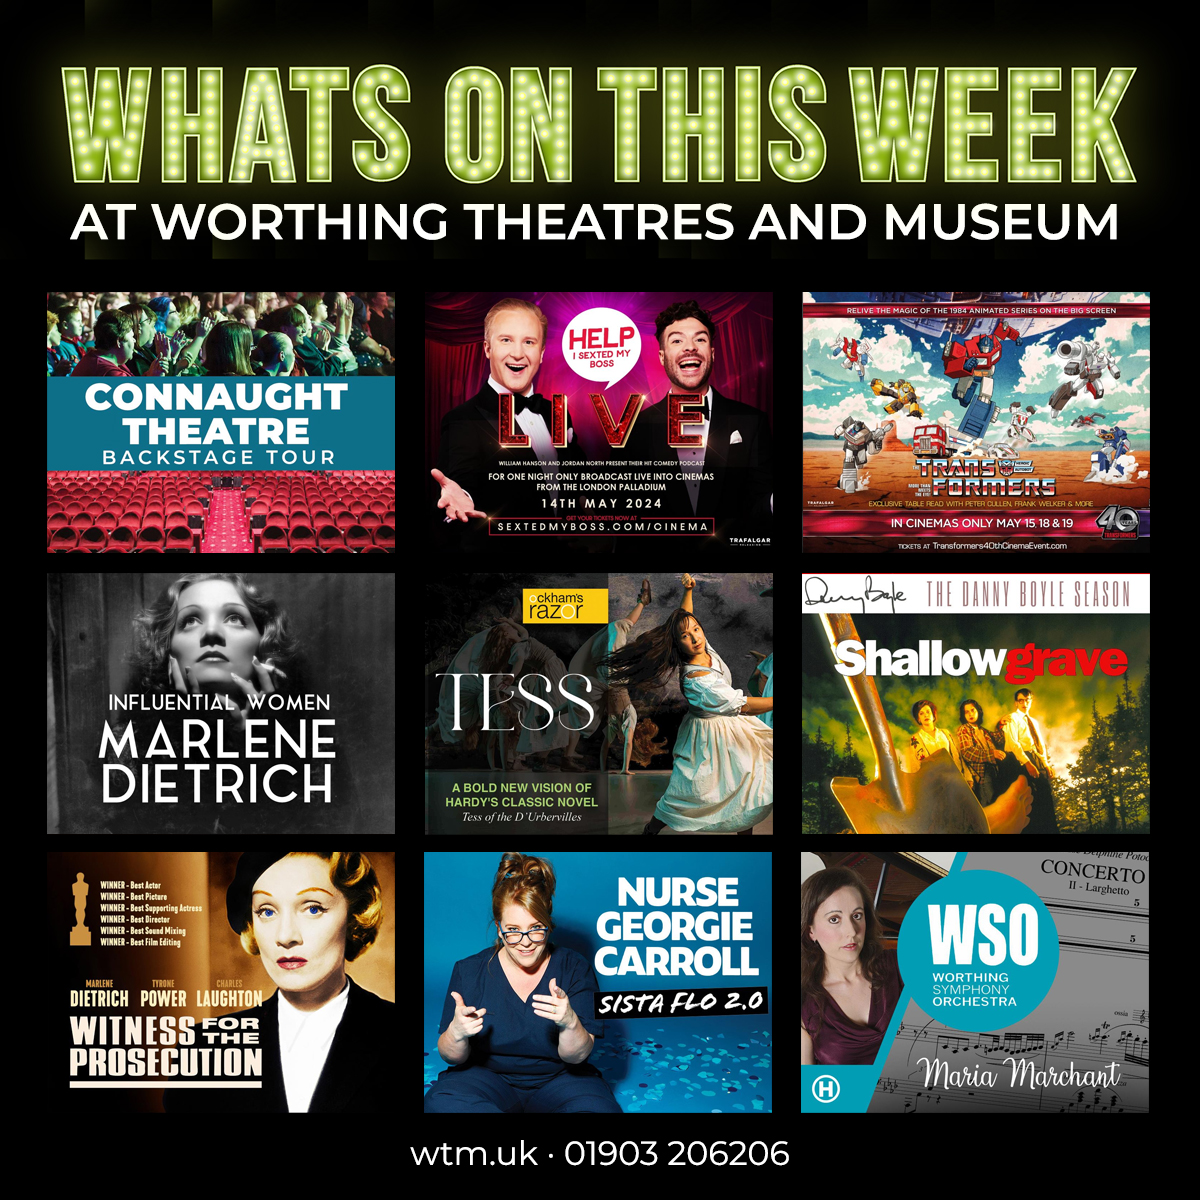 🤣🎼🎭👭 Exciting events coming up at Worthing Theatres & Museum! Don't miss out! 🤣🎼🎭👭 Don't miss these incredible experiences! Book your tickets now! 🎟️ - wtmlink.org/whatson #WTM #LiveEvents #Theatre #Music #Museum #Art #History